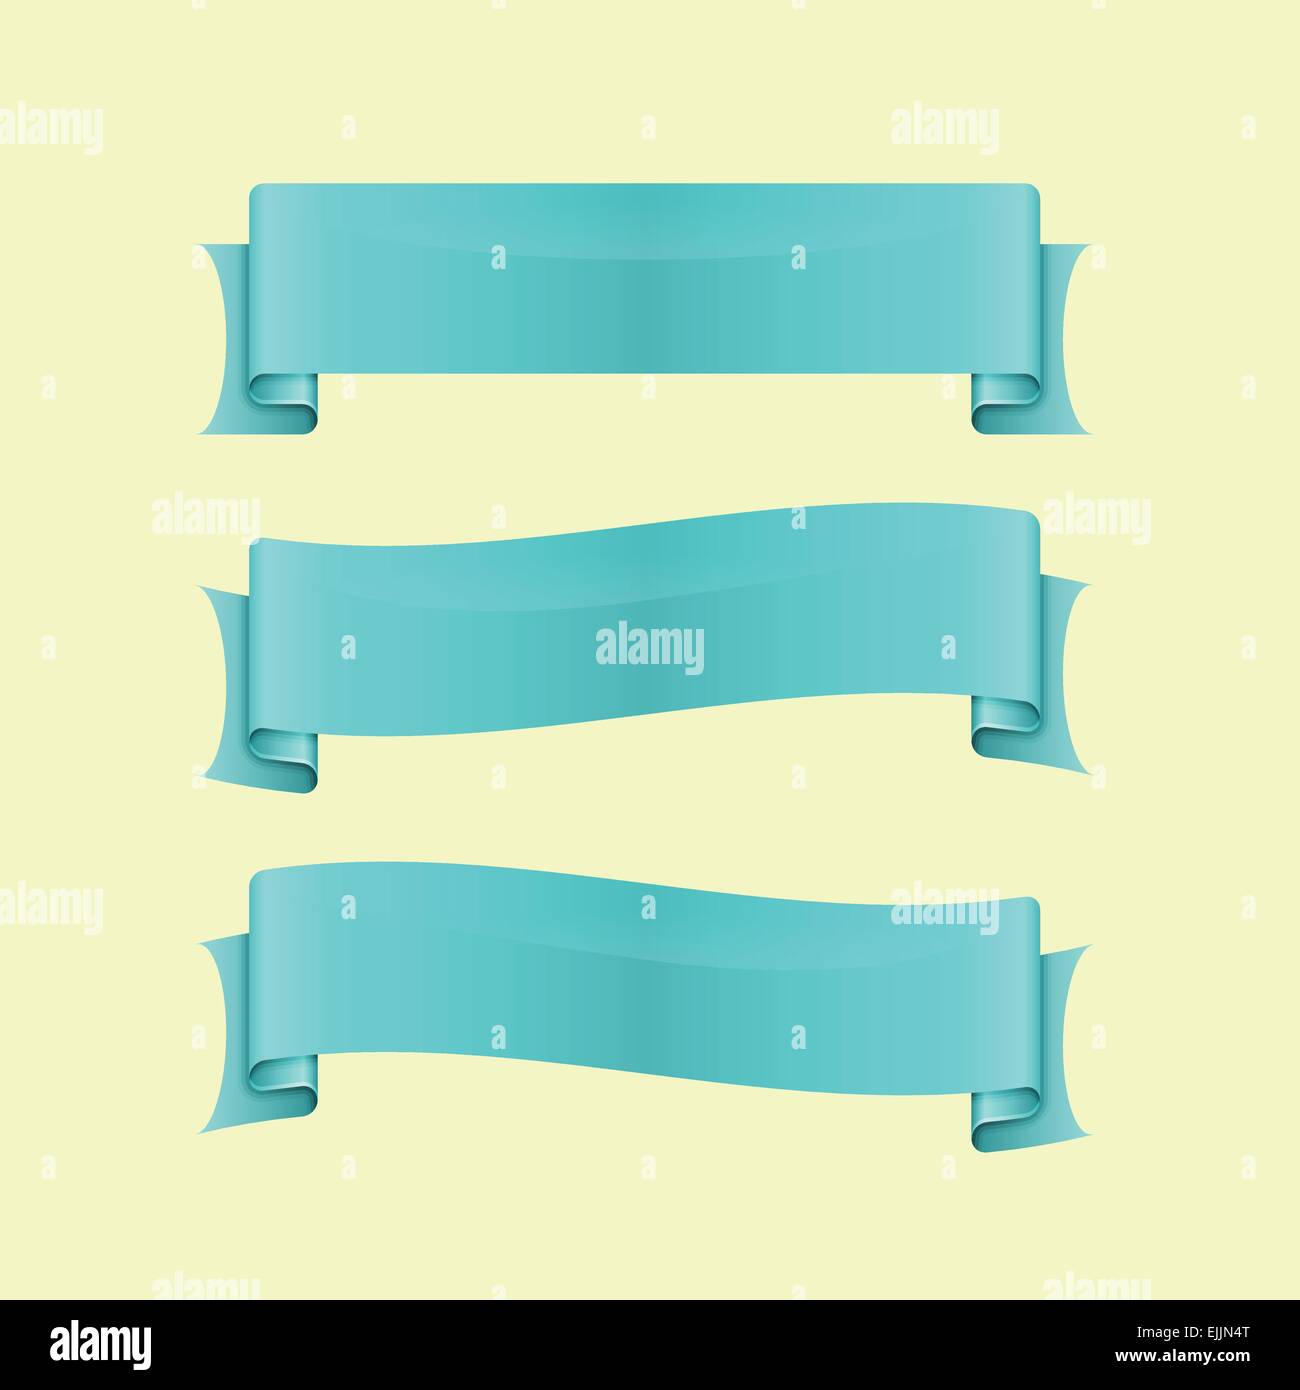 Ribbon label banner with word please donate Vector Image